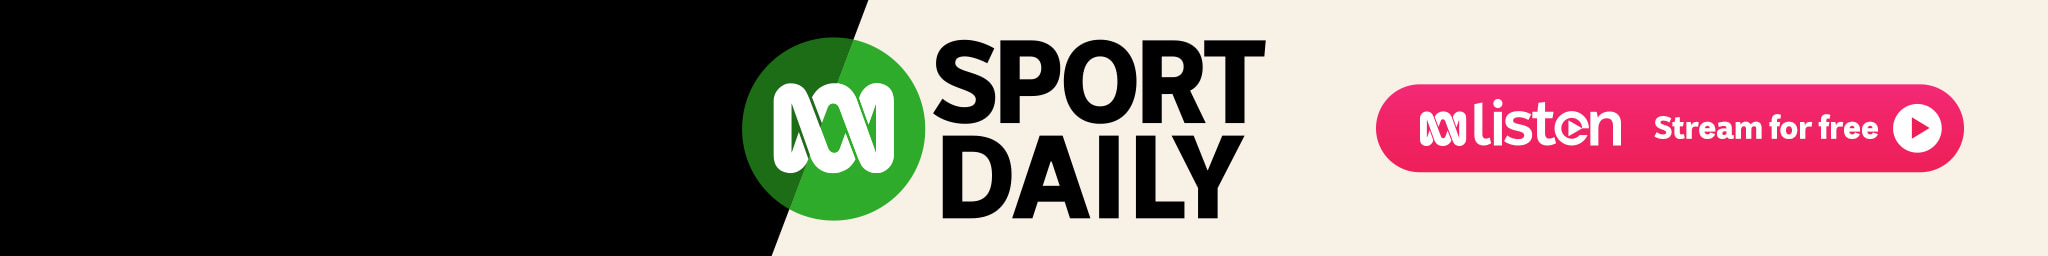 Sport daily podcast. Stream for free on ABC Listen app.